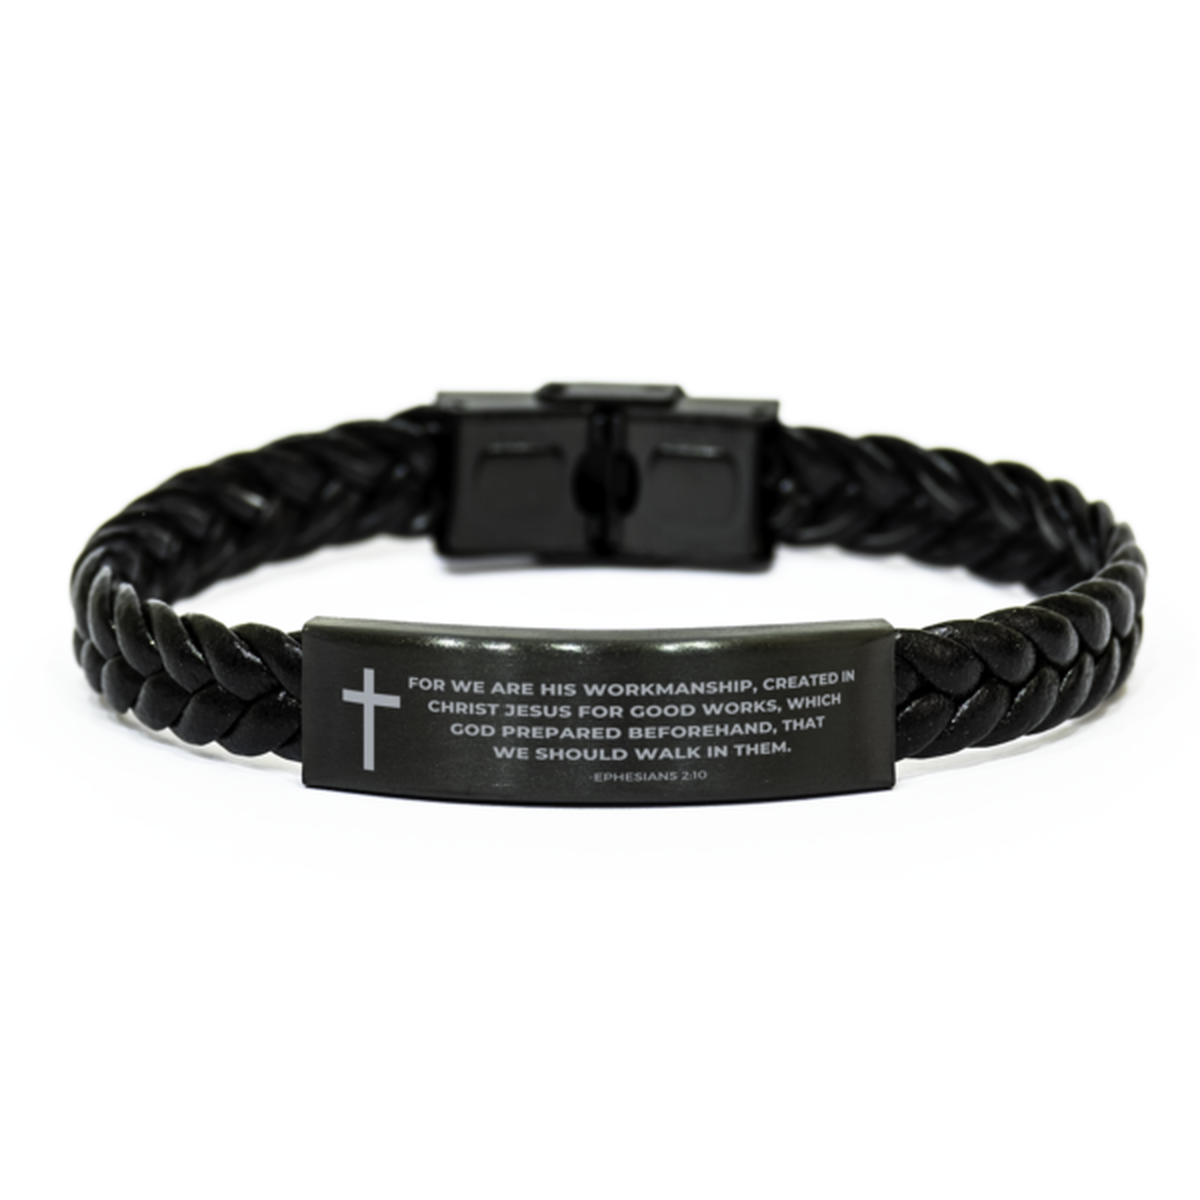 Baptism Gifts For Teenage Boys Girls, Christian Bible Verse Braided Leather Bracelet, For we are His workmanship, Catholic Confirmation Gifts for Son, Godson, Grandson, Nephew